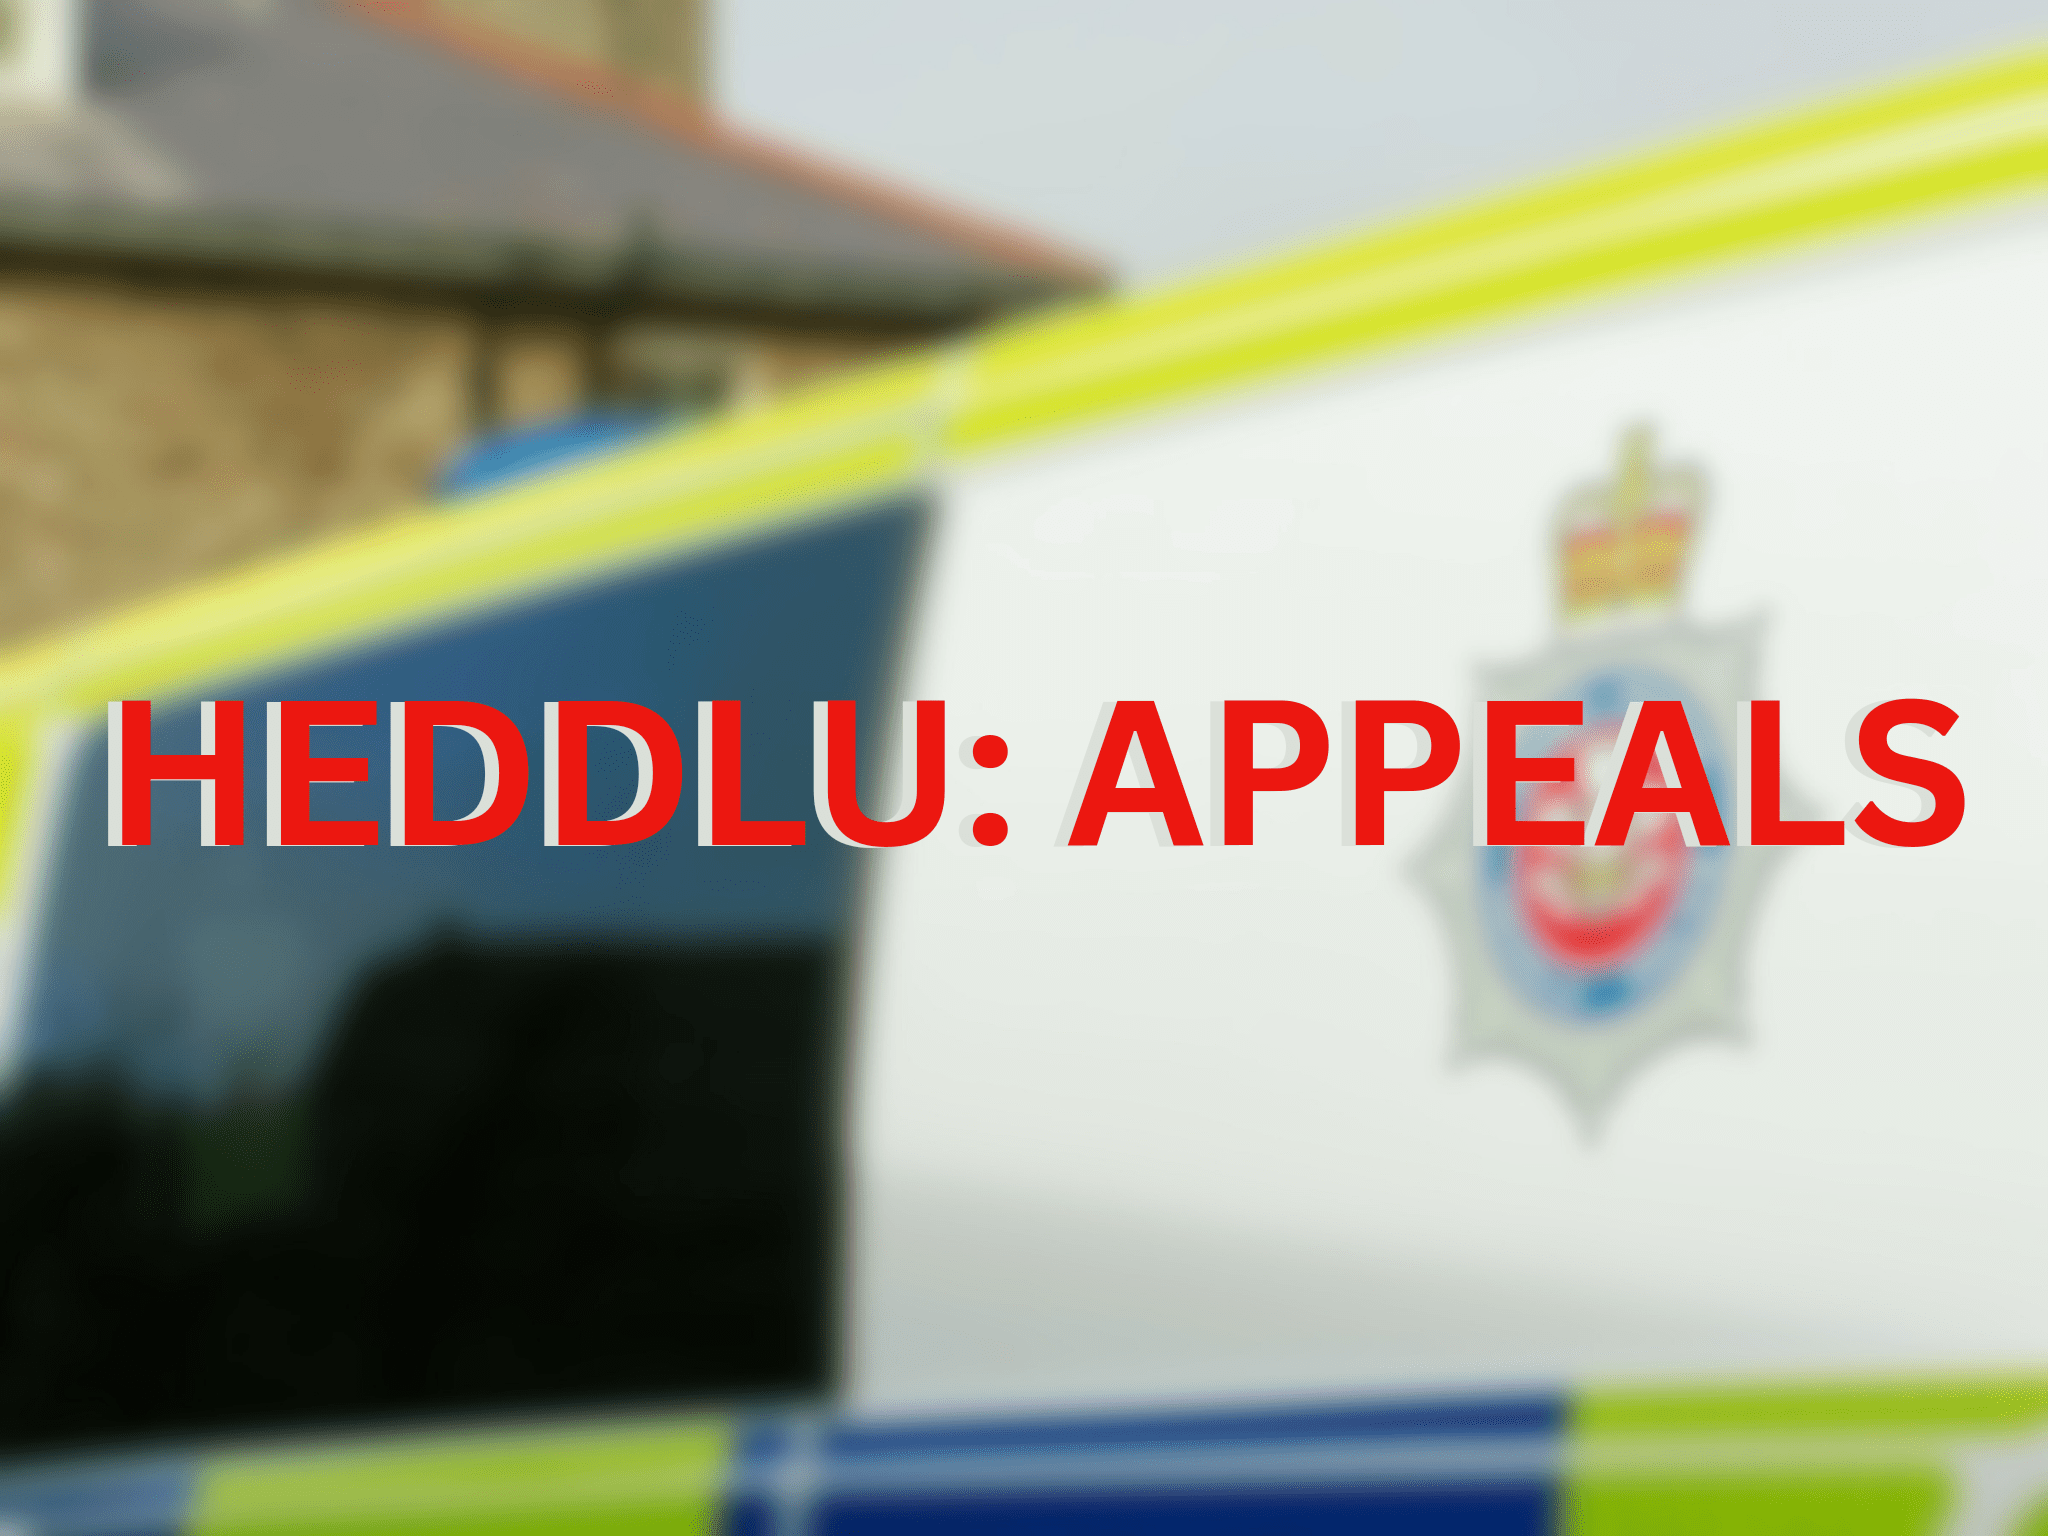 Police appeal for witnesses following criminal damage to vehicle in Penygroes